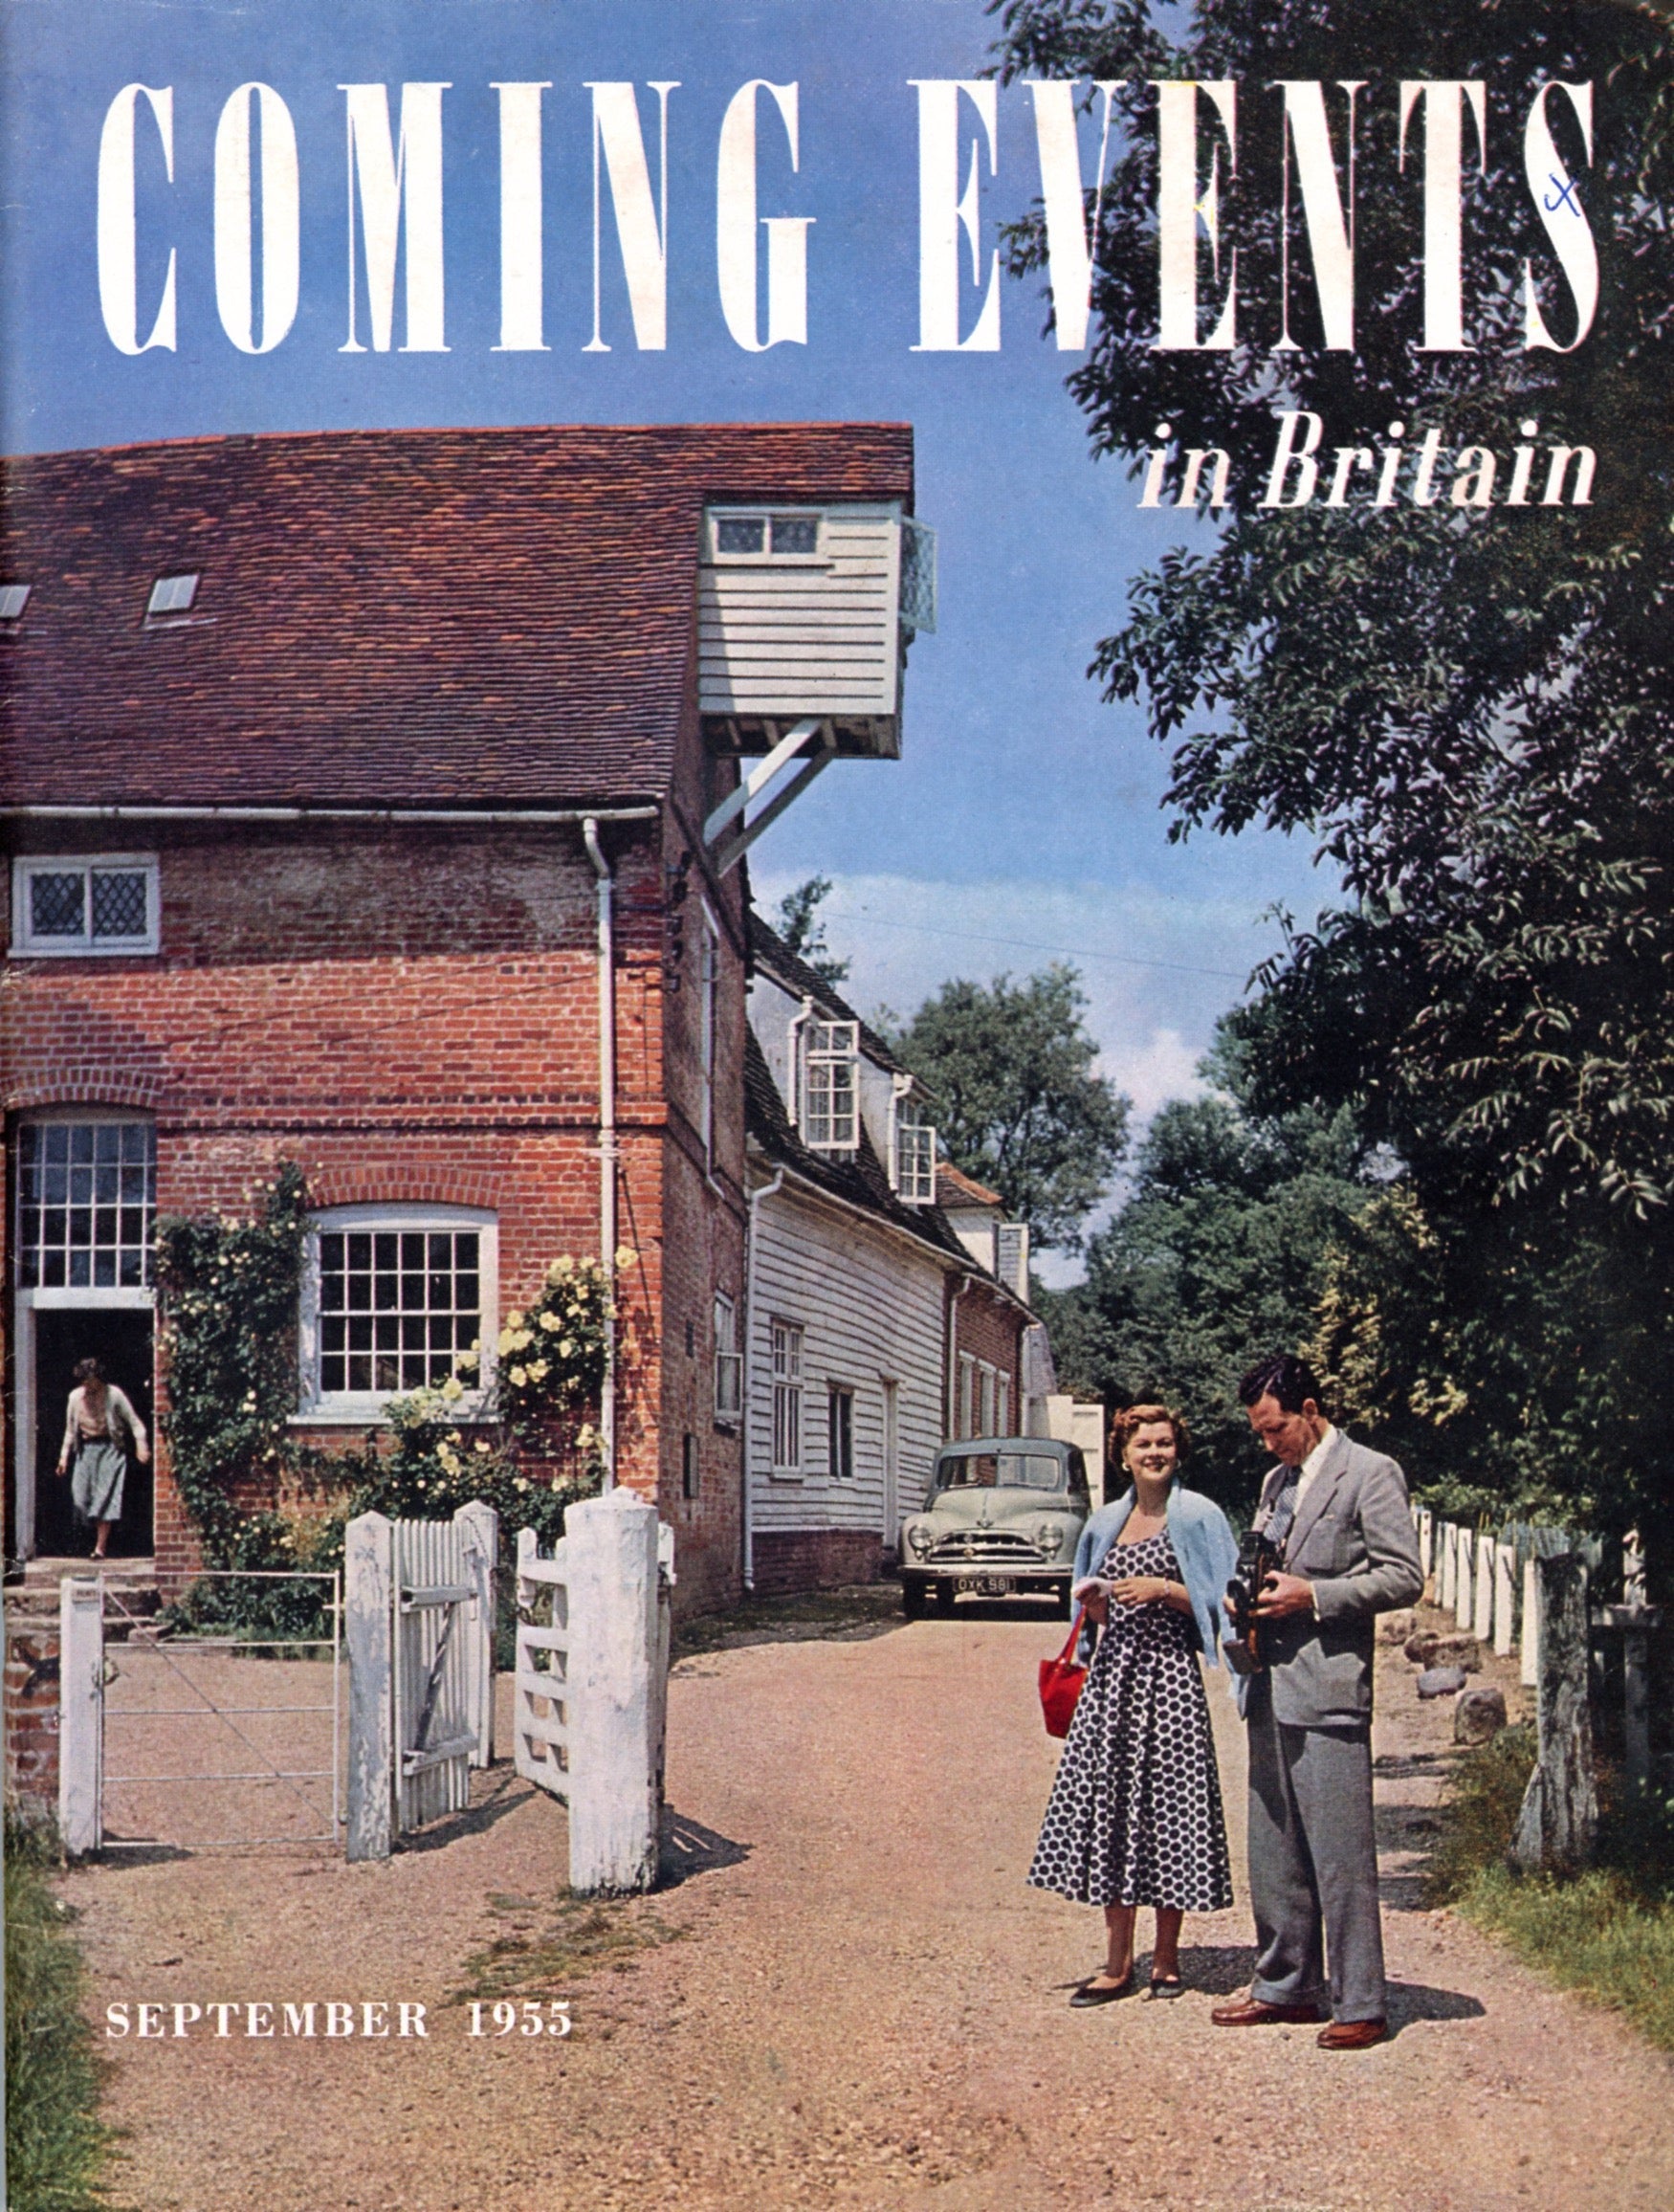 COMING EVENTS IN BRITAIN Vintage Travel Magazine © September 1955